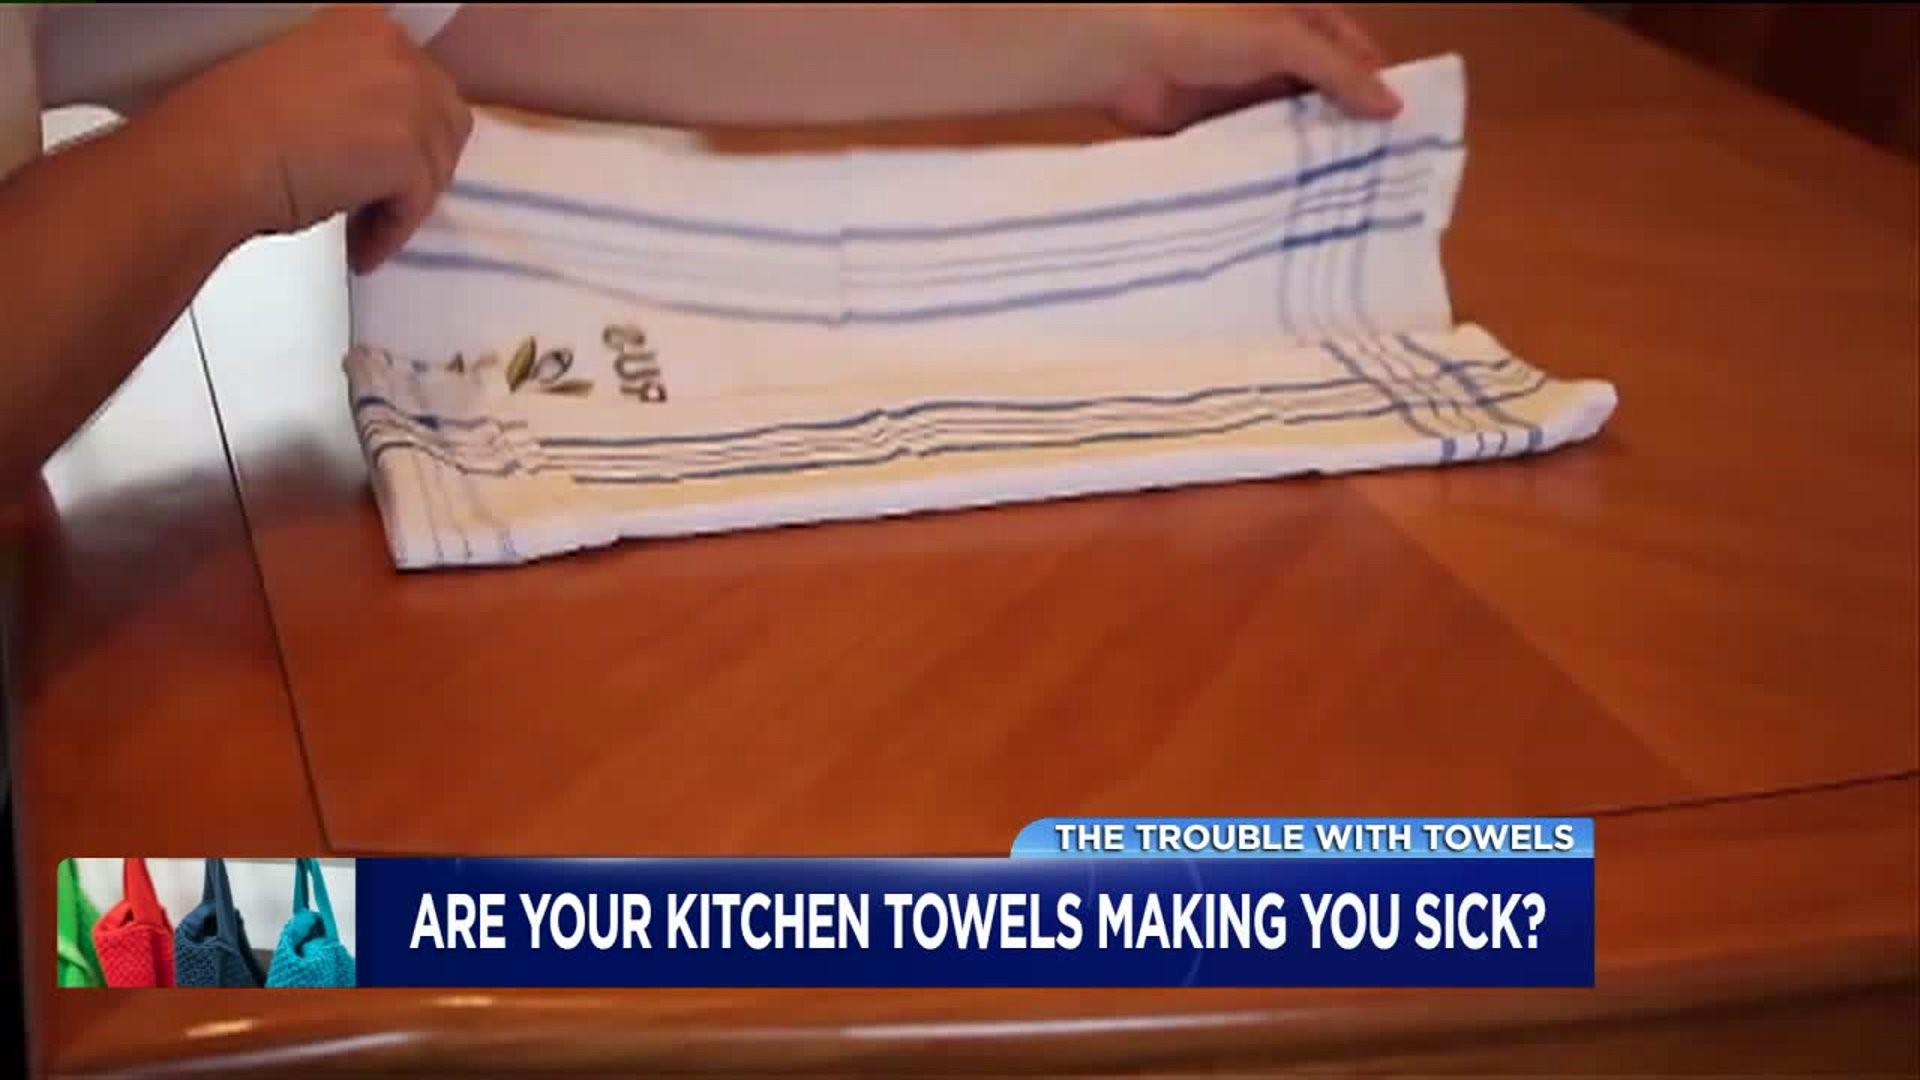 Could Your Kitchen Towels Make You Sick?